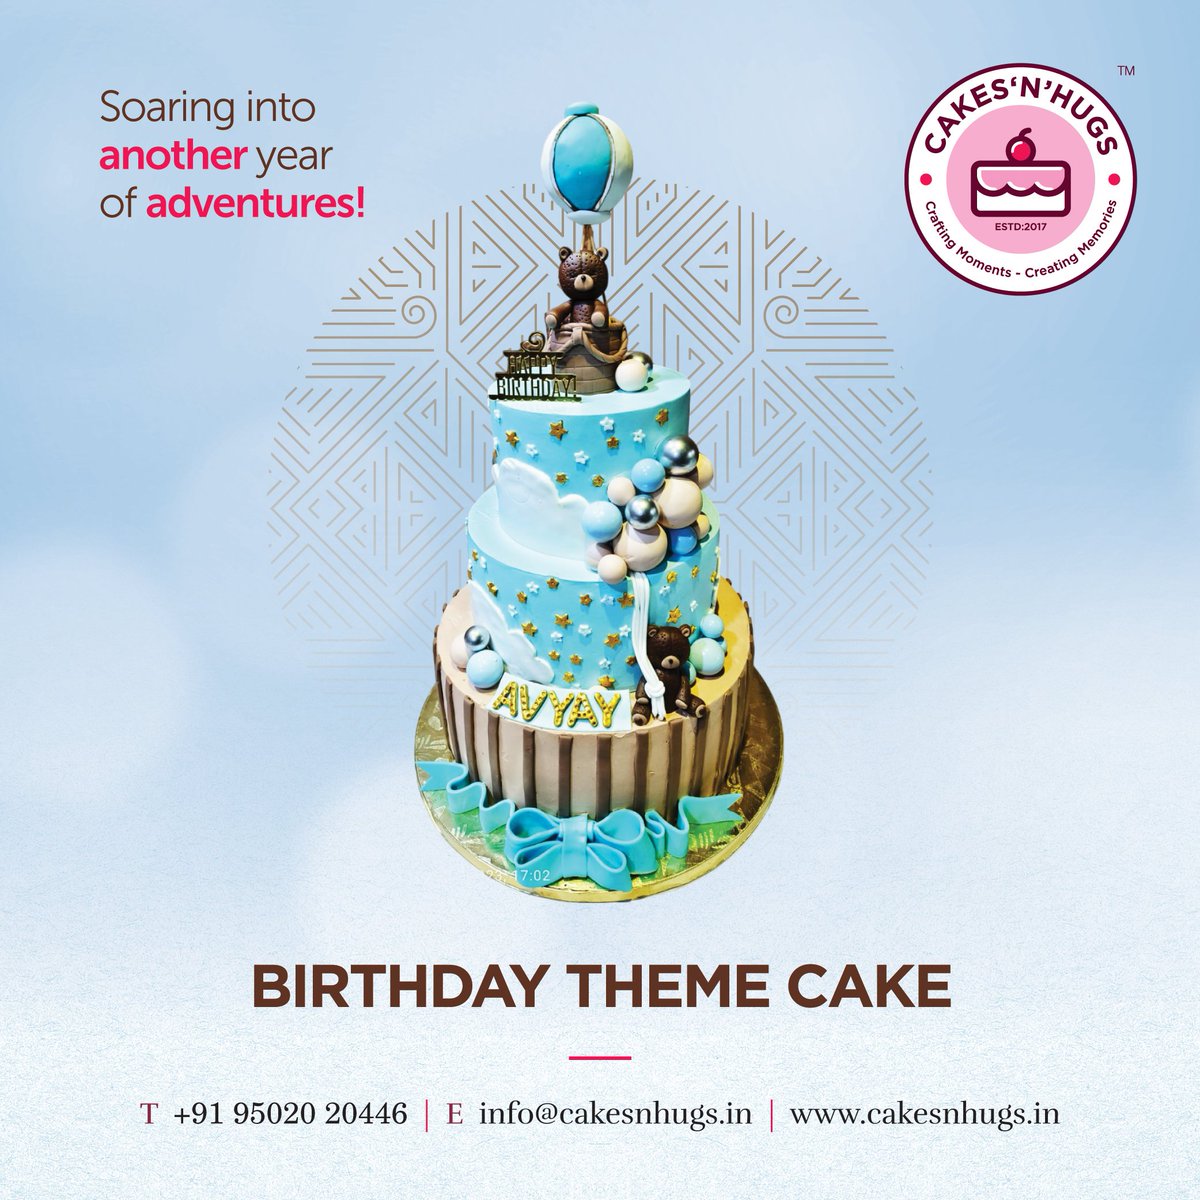 Reach for the skies with our whimsical hot air balloon cake from Cakes n Hugs! Let your sweetest memories take flight. Order now at cakesnhugs.in

#CakesnHugs #TreatYourself #CustomCakes #CelebrationCakes #BirthdayCakes #AnniversaryCakes #SpecialCakes #Hyderabad